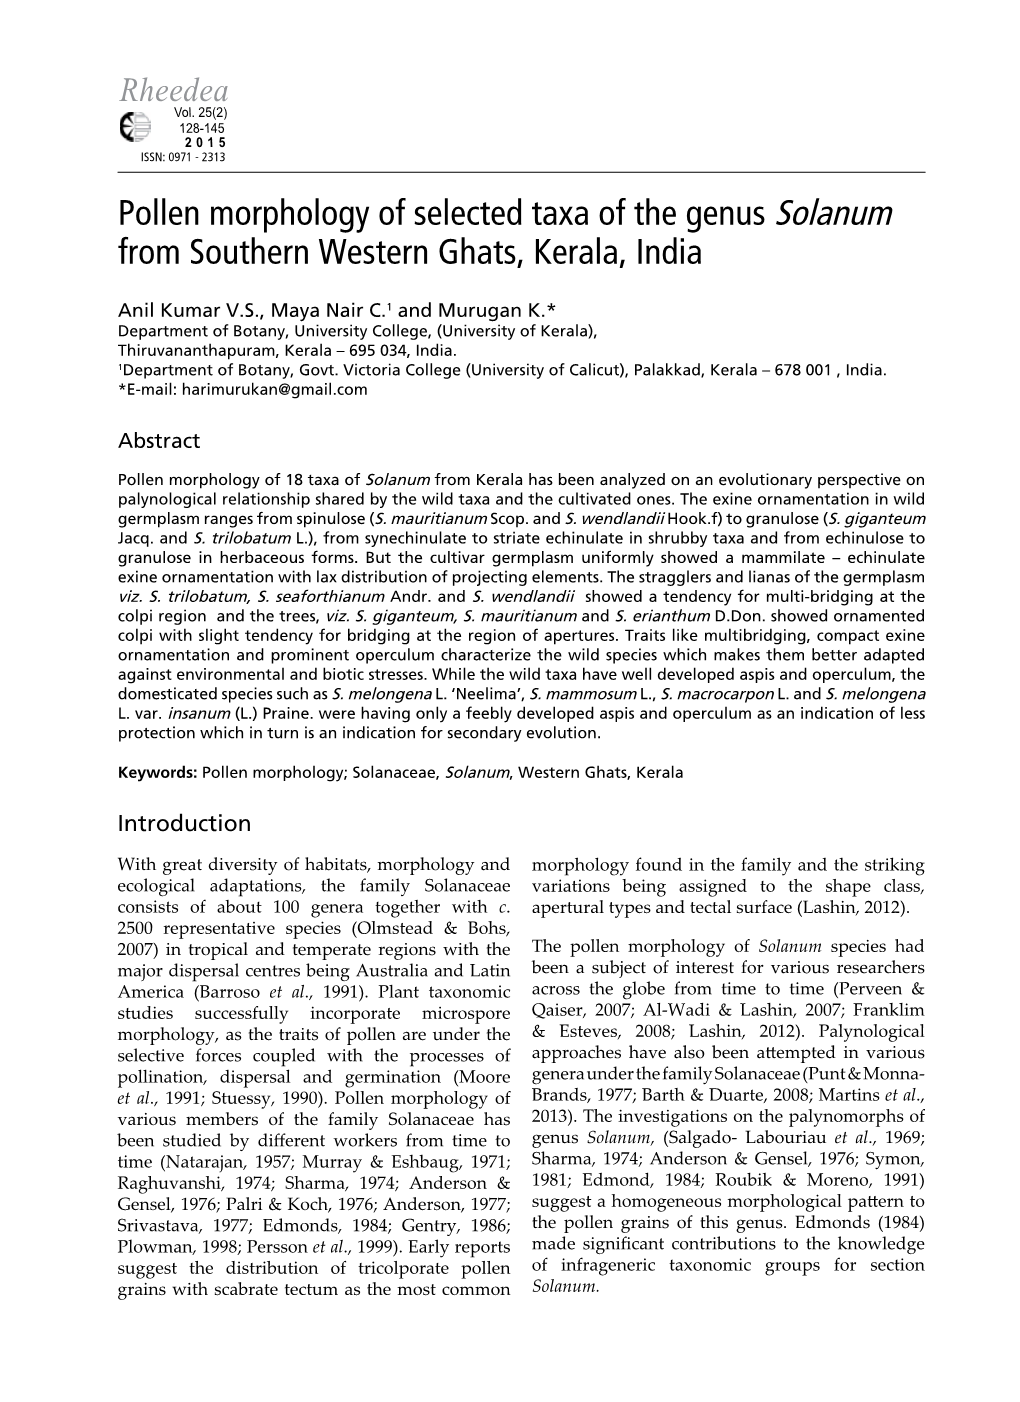 Pollen Morphology of Selected Taxa of the Genus Solanum from Southern Western Ghats, Kerala, India